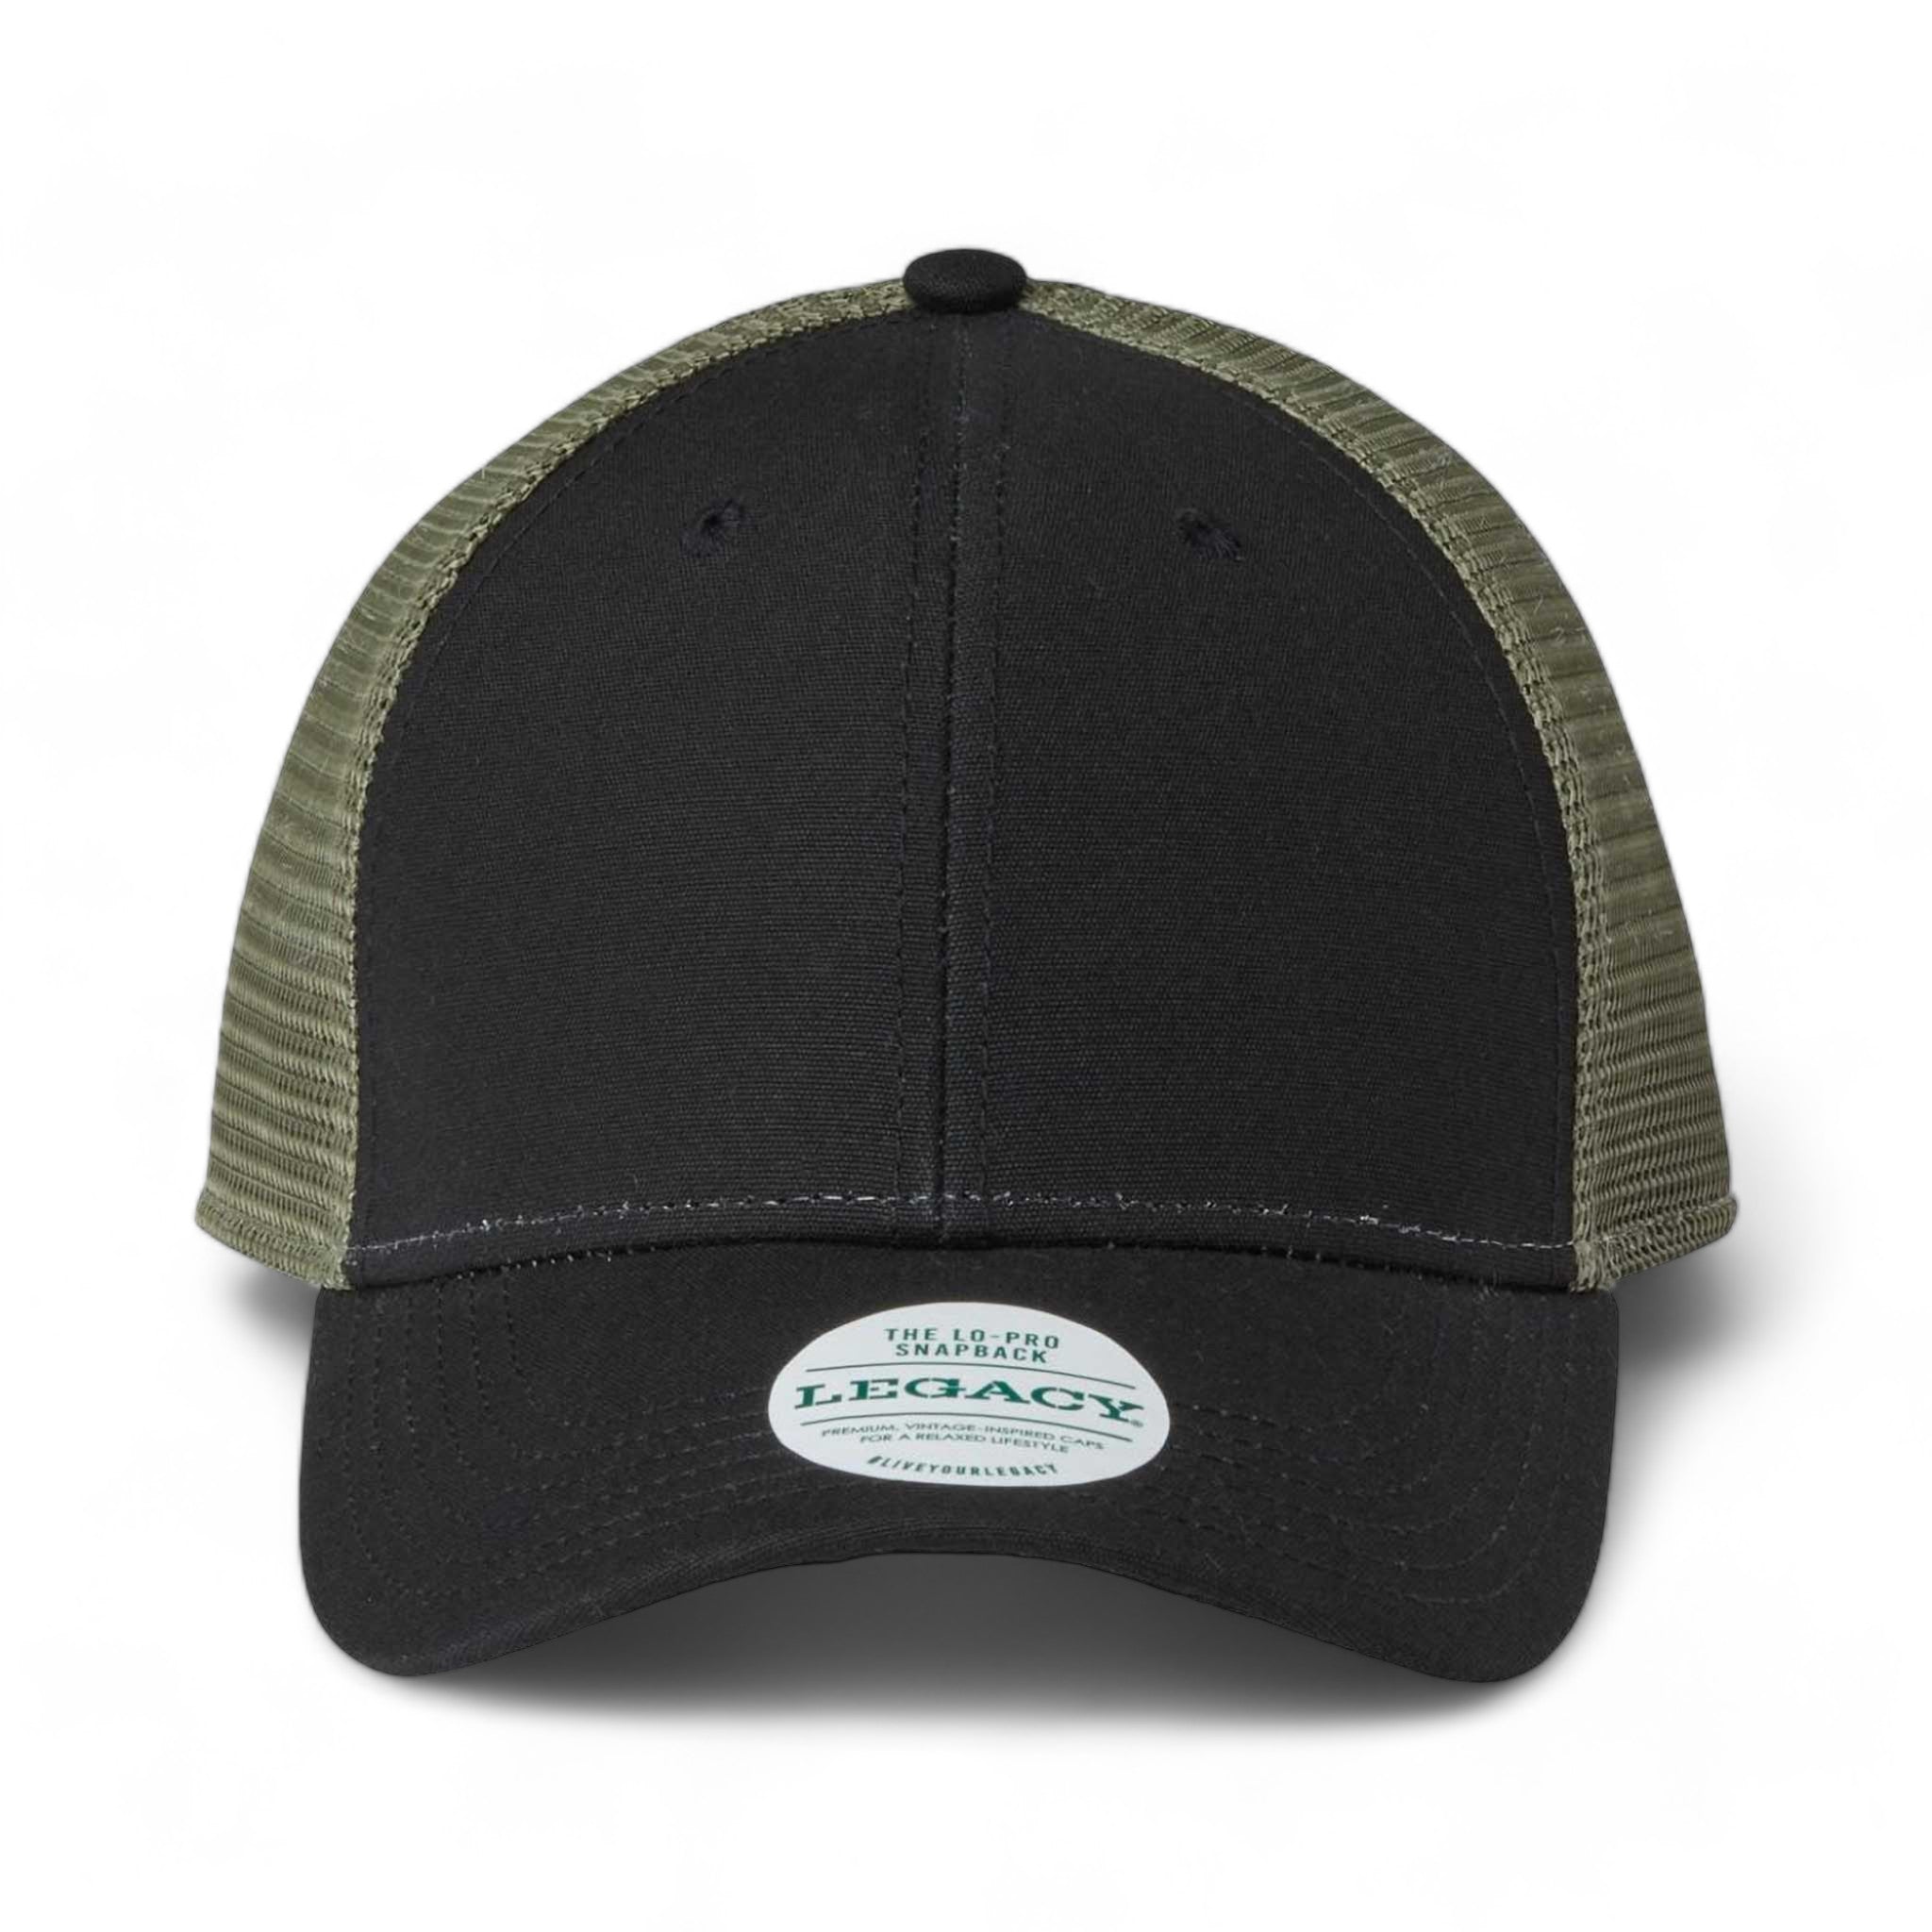 Front view of LEGACY LPS custom hat in black and light olive